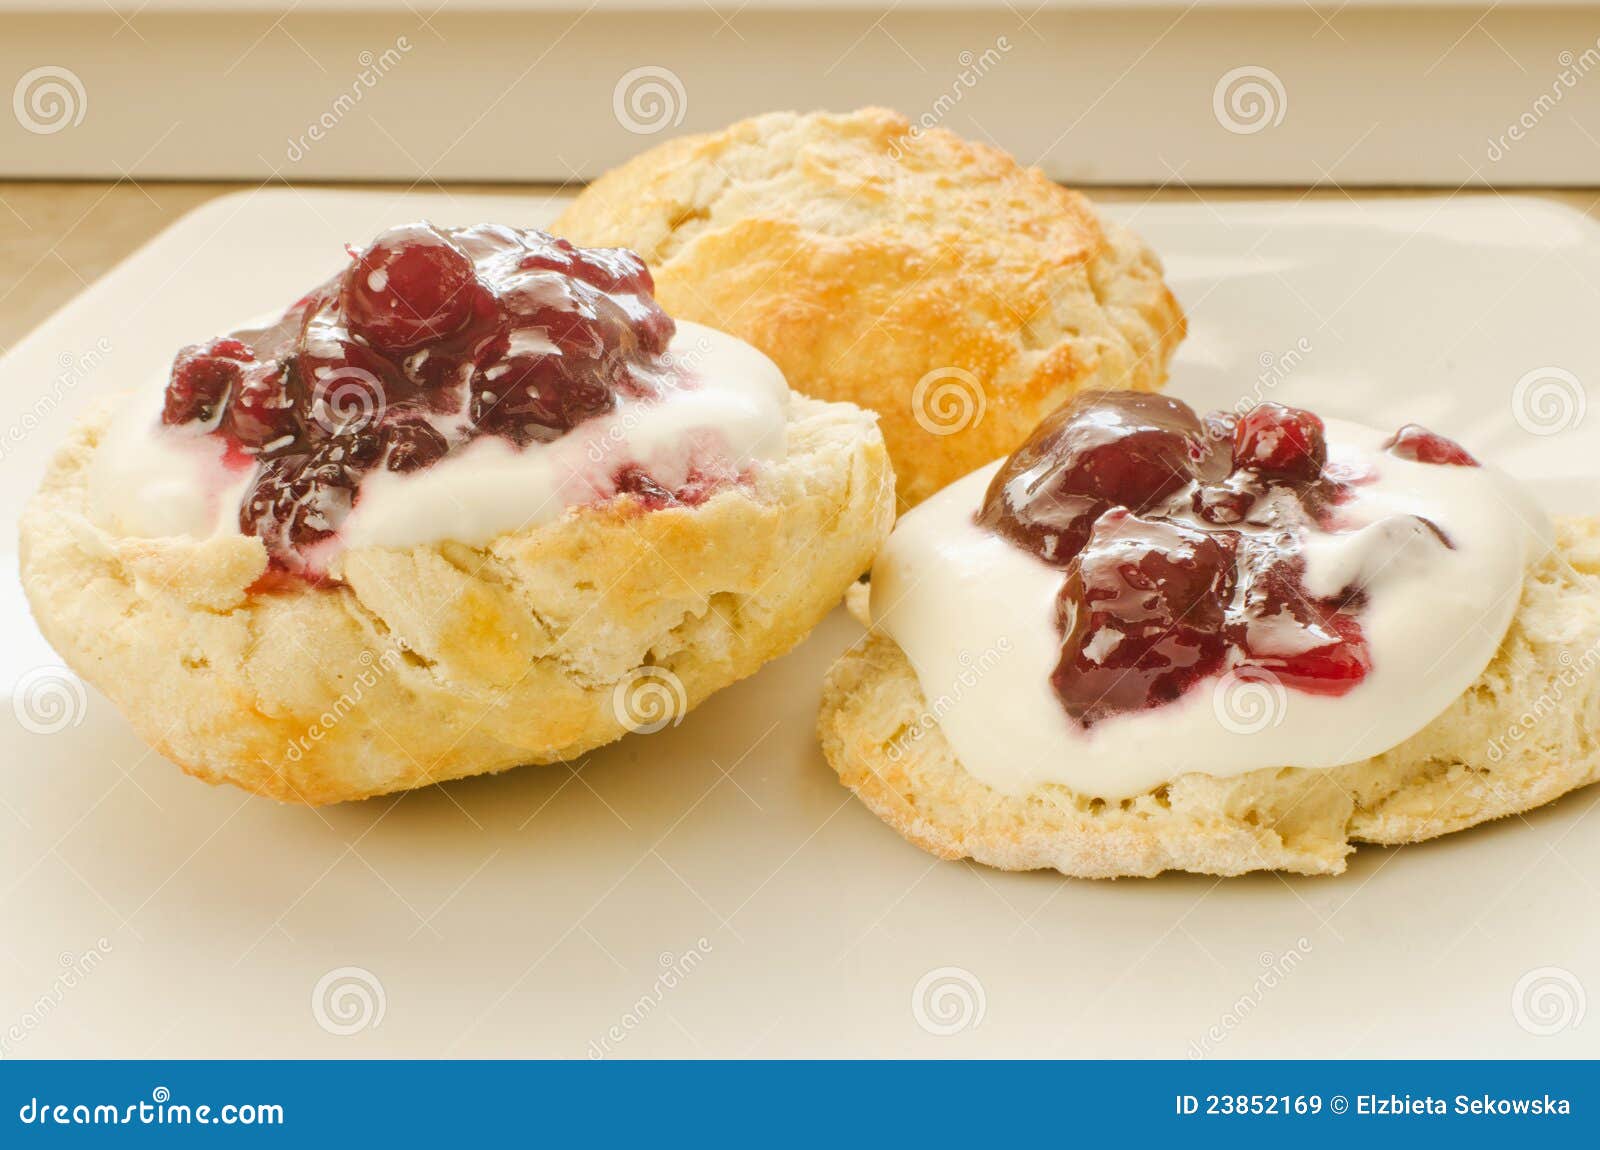  Biscuits  with jam  stock image Image of biscuits  baked 